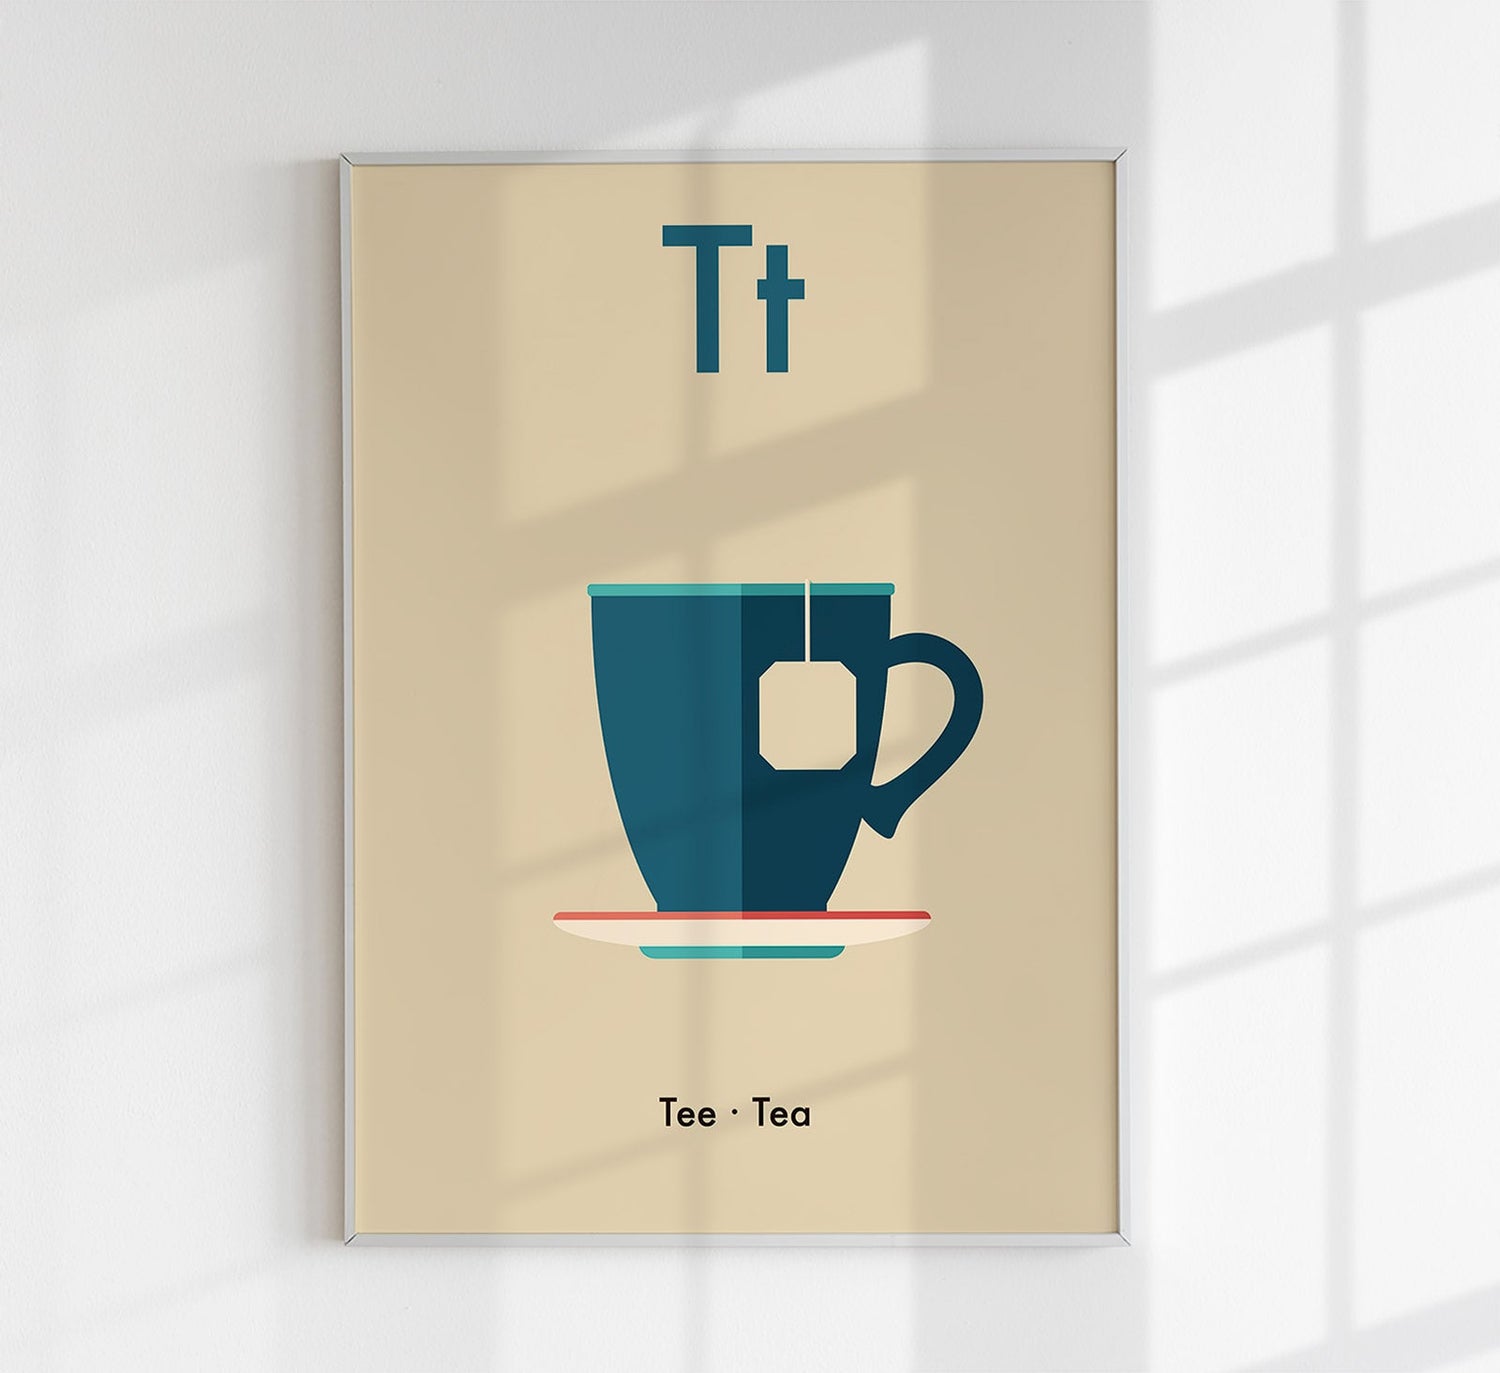 T for Tea Children's Alphabet Poster in German and English